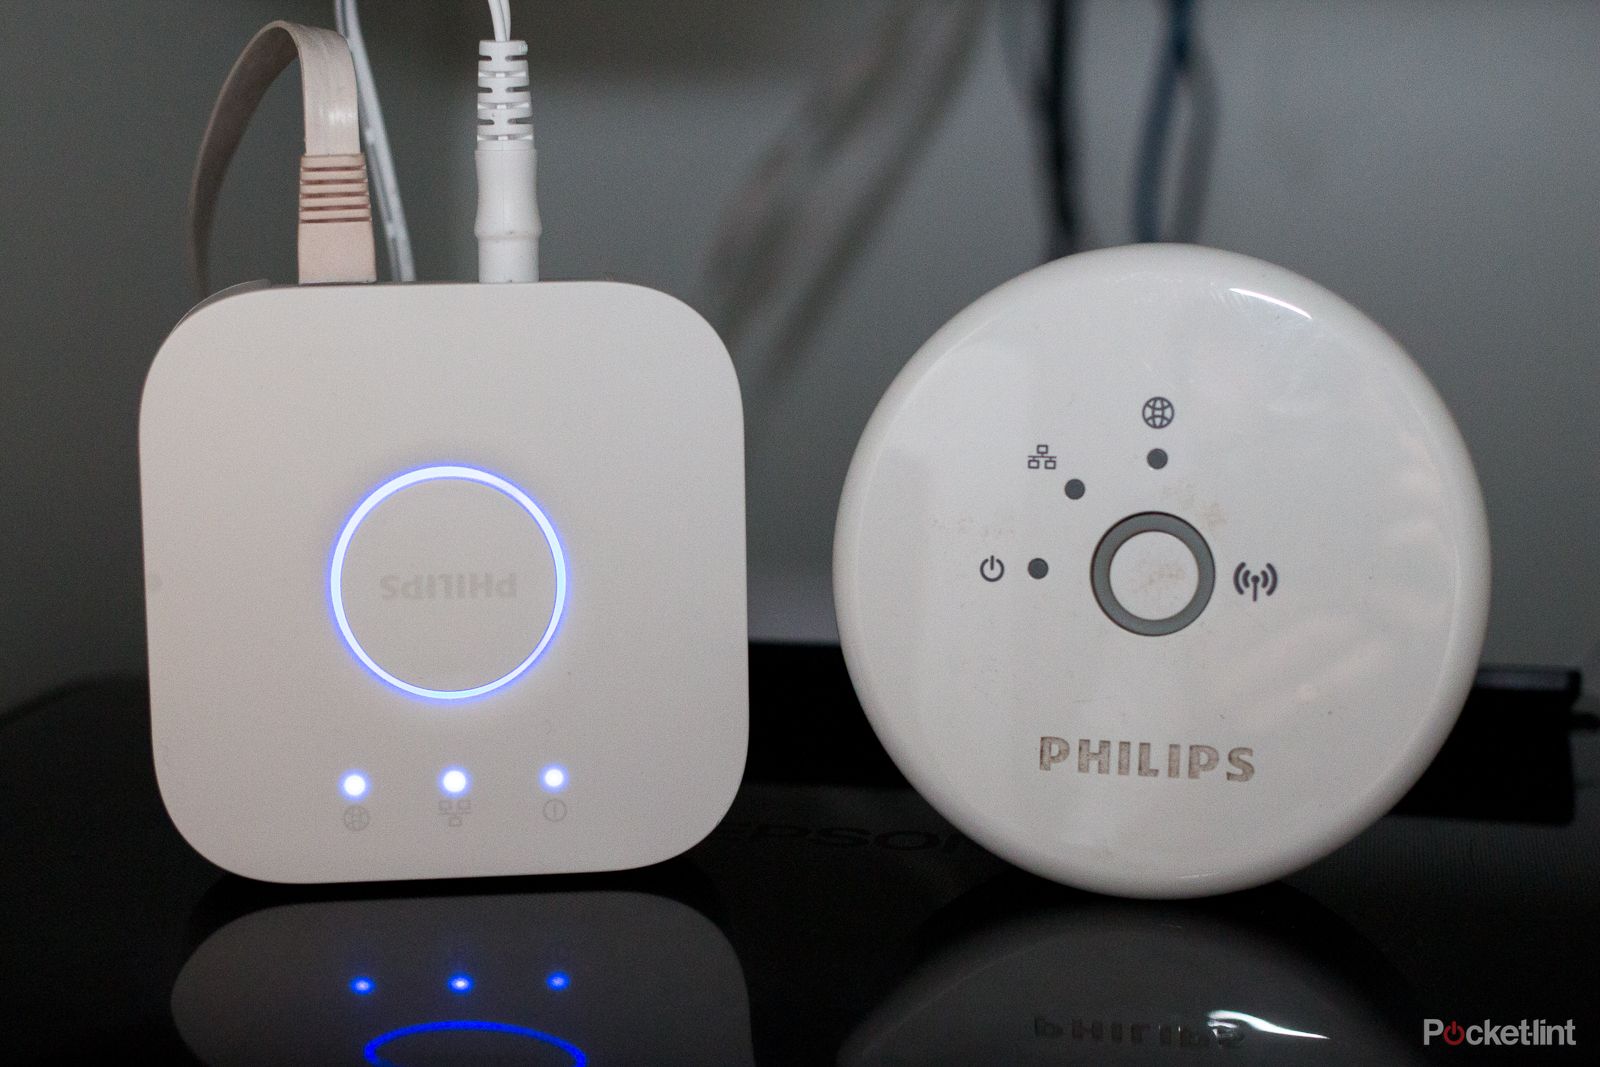 Own the original Hue Bridge Philips is cutting its internet connectivity image 1